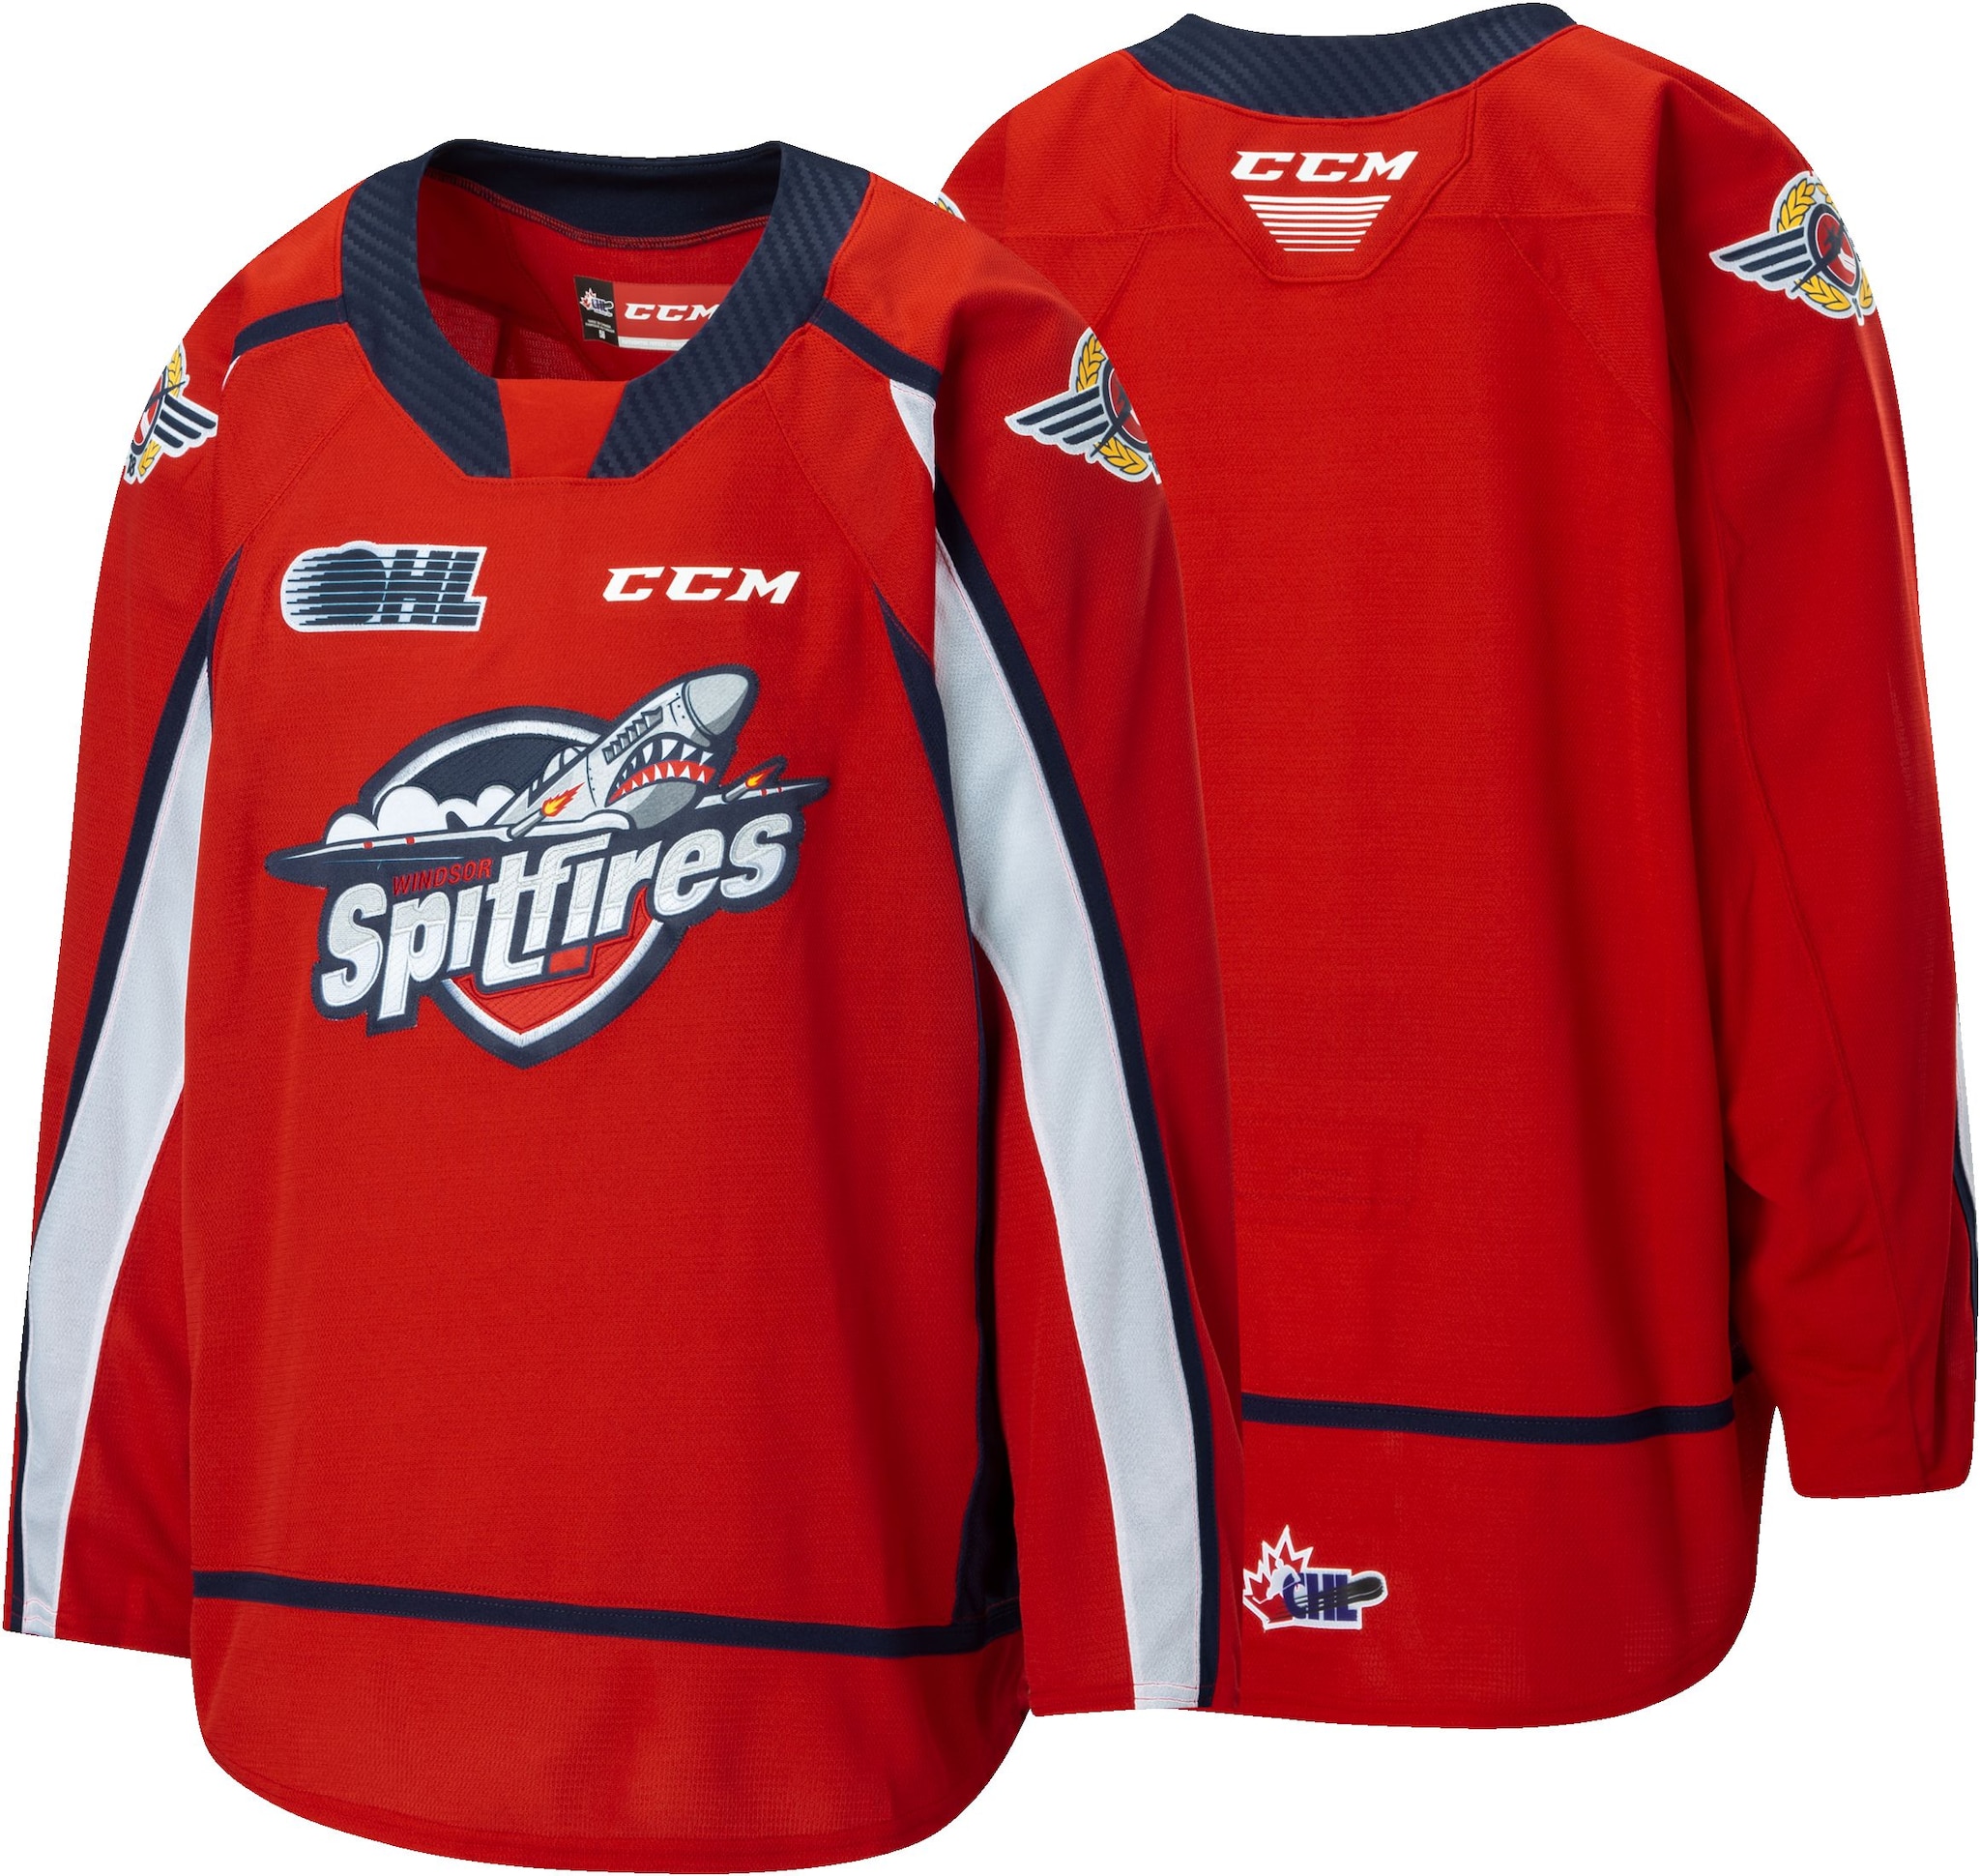 NHL Jerseys for sale in Windsor, Ontario